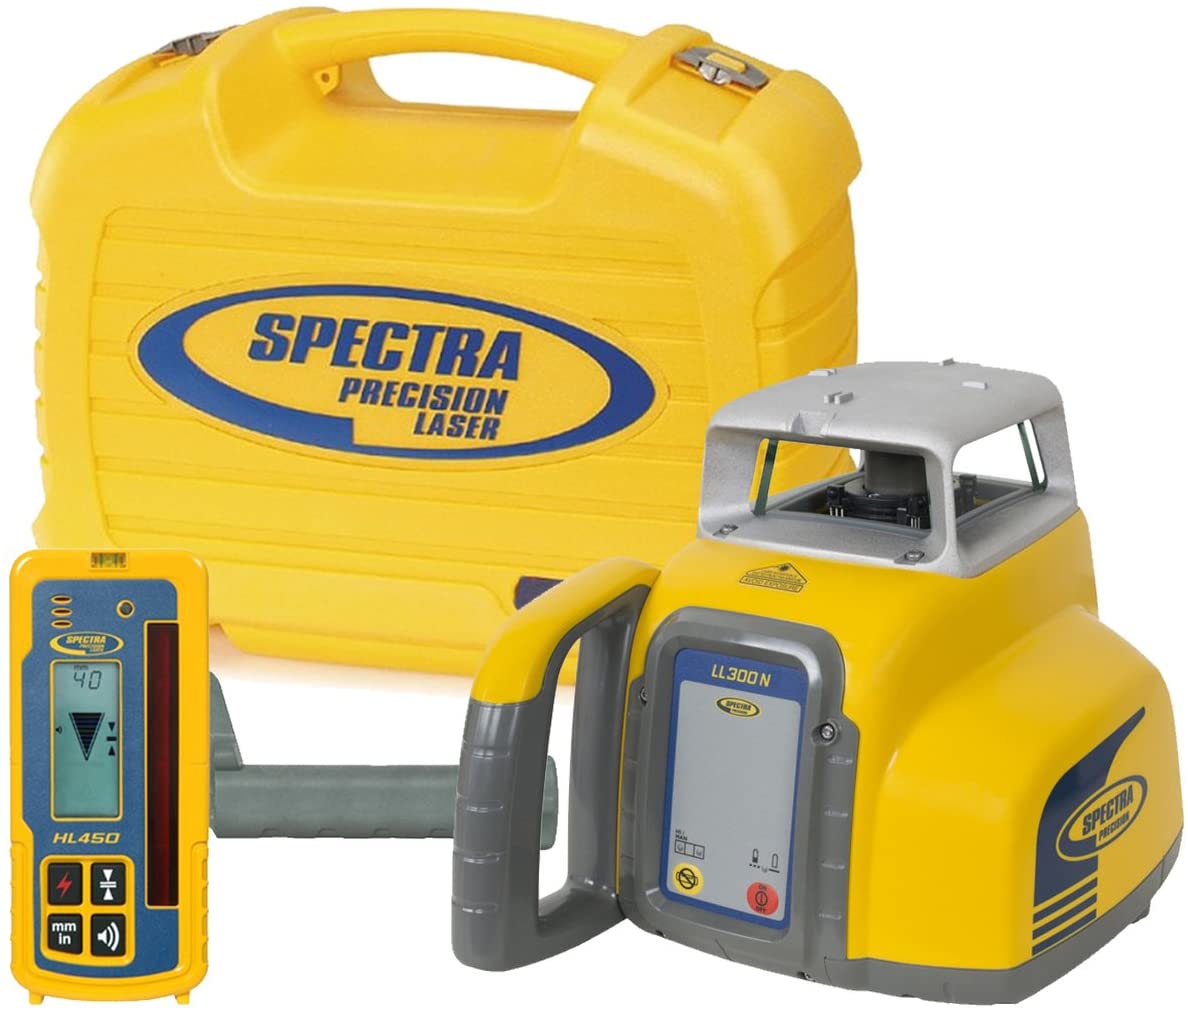 Spectra Precision LL300N Automatic Self-Levelling Laser Level Package with Laser, HL450 Receiver and Clamp in Case